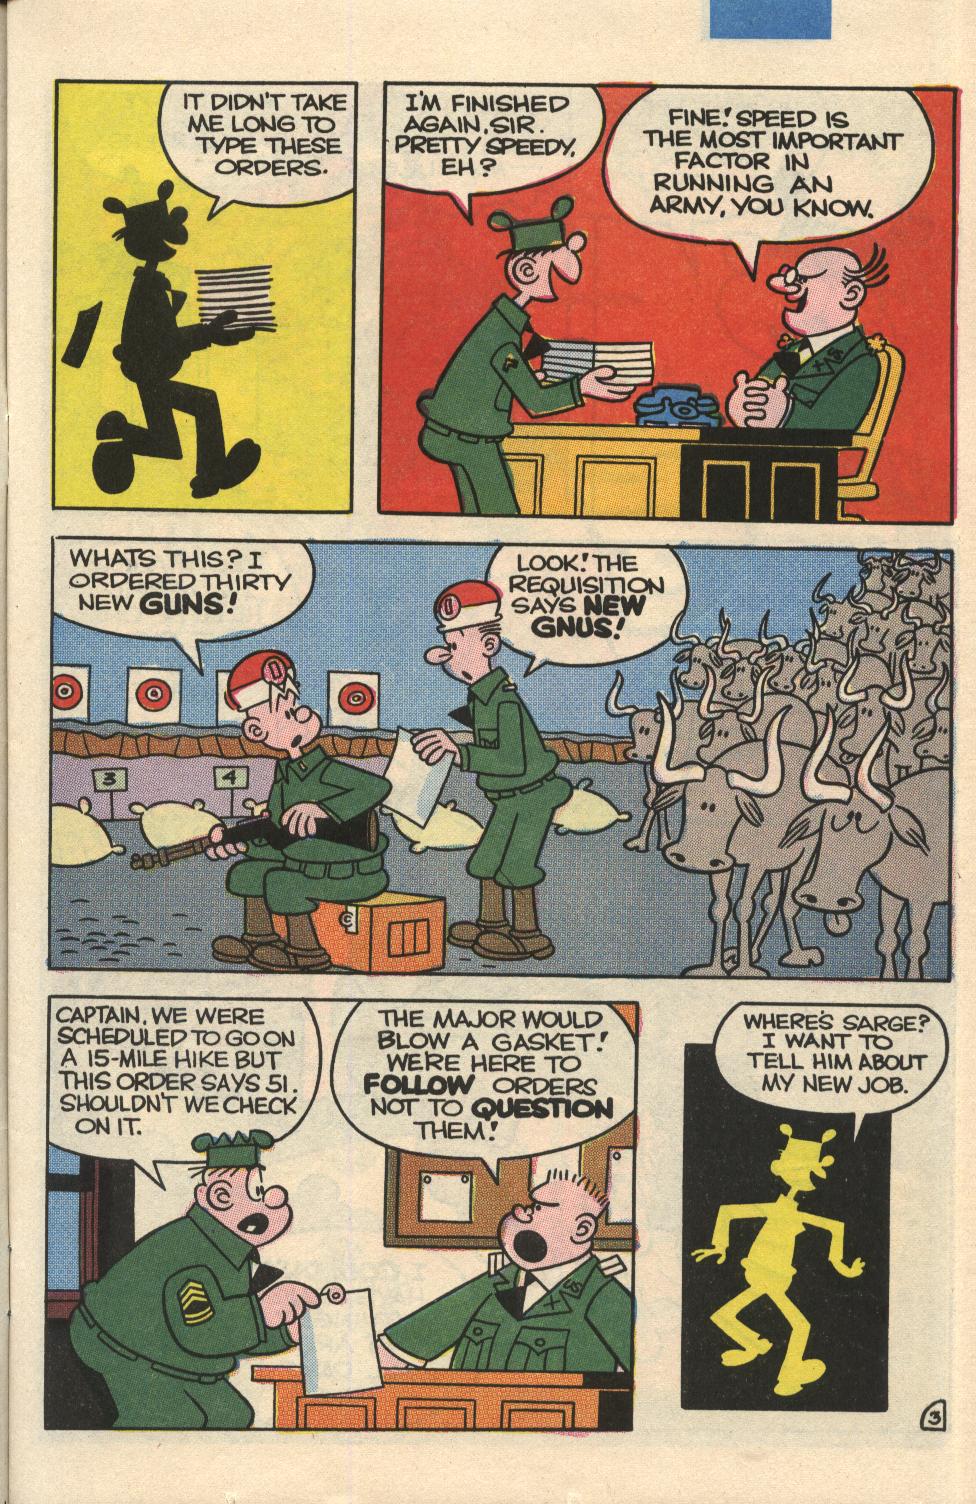 Beetle Bailey Issue 1 | Read Beetle Bailey Issue 1 comic online in high  quality. Read Full Comic online for free - Read comics online in high  quality .